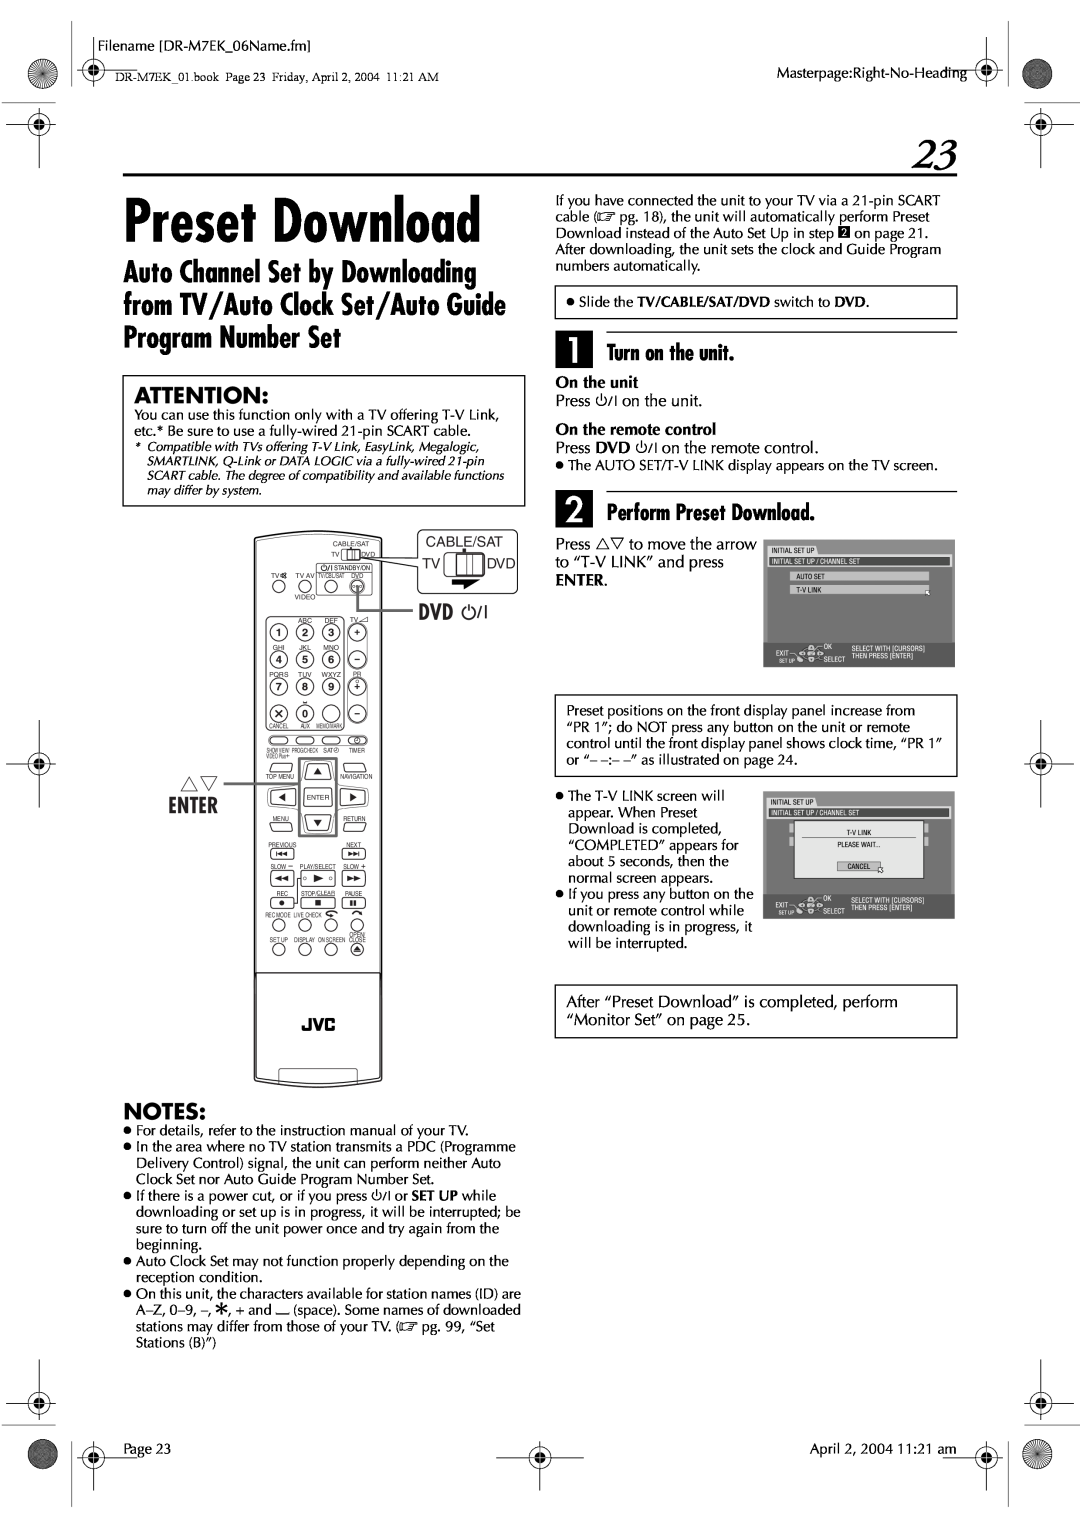 JVC DR-M7S manual B Perform Preset Download, Enter, Dvd F, A Turn on the unit, On the unit, On the remote control 